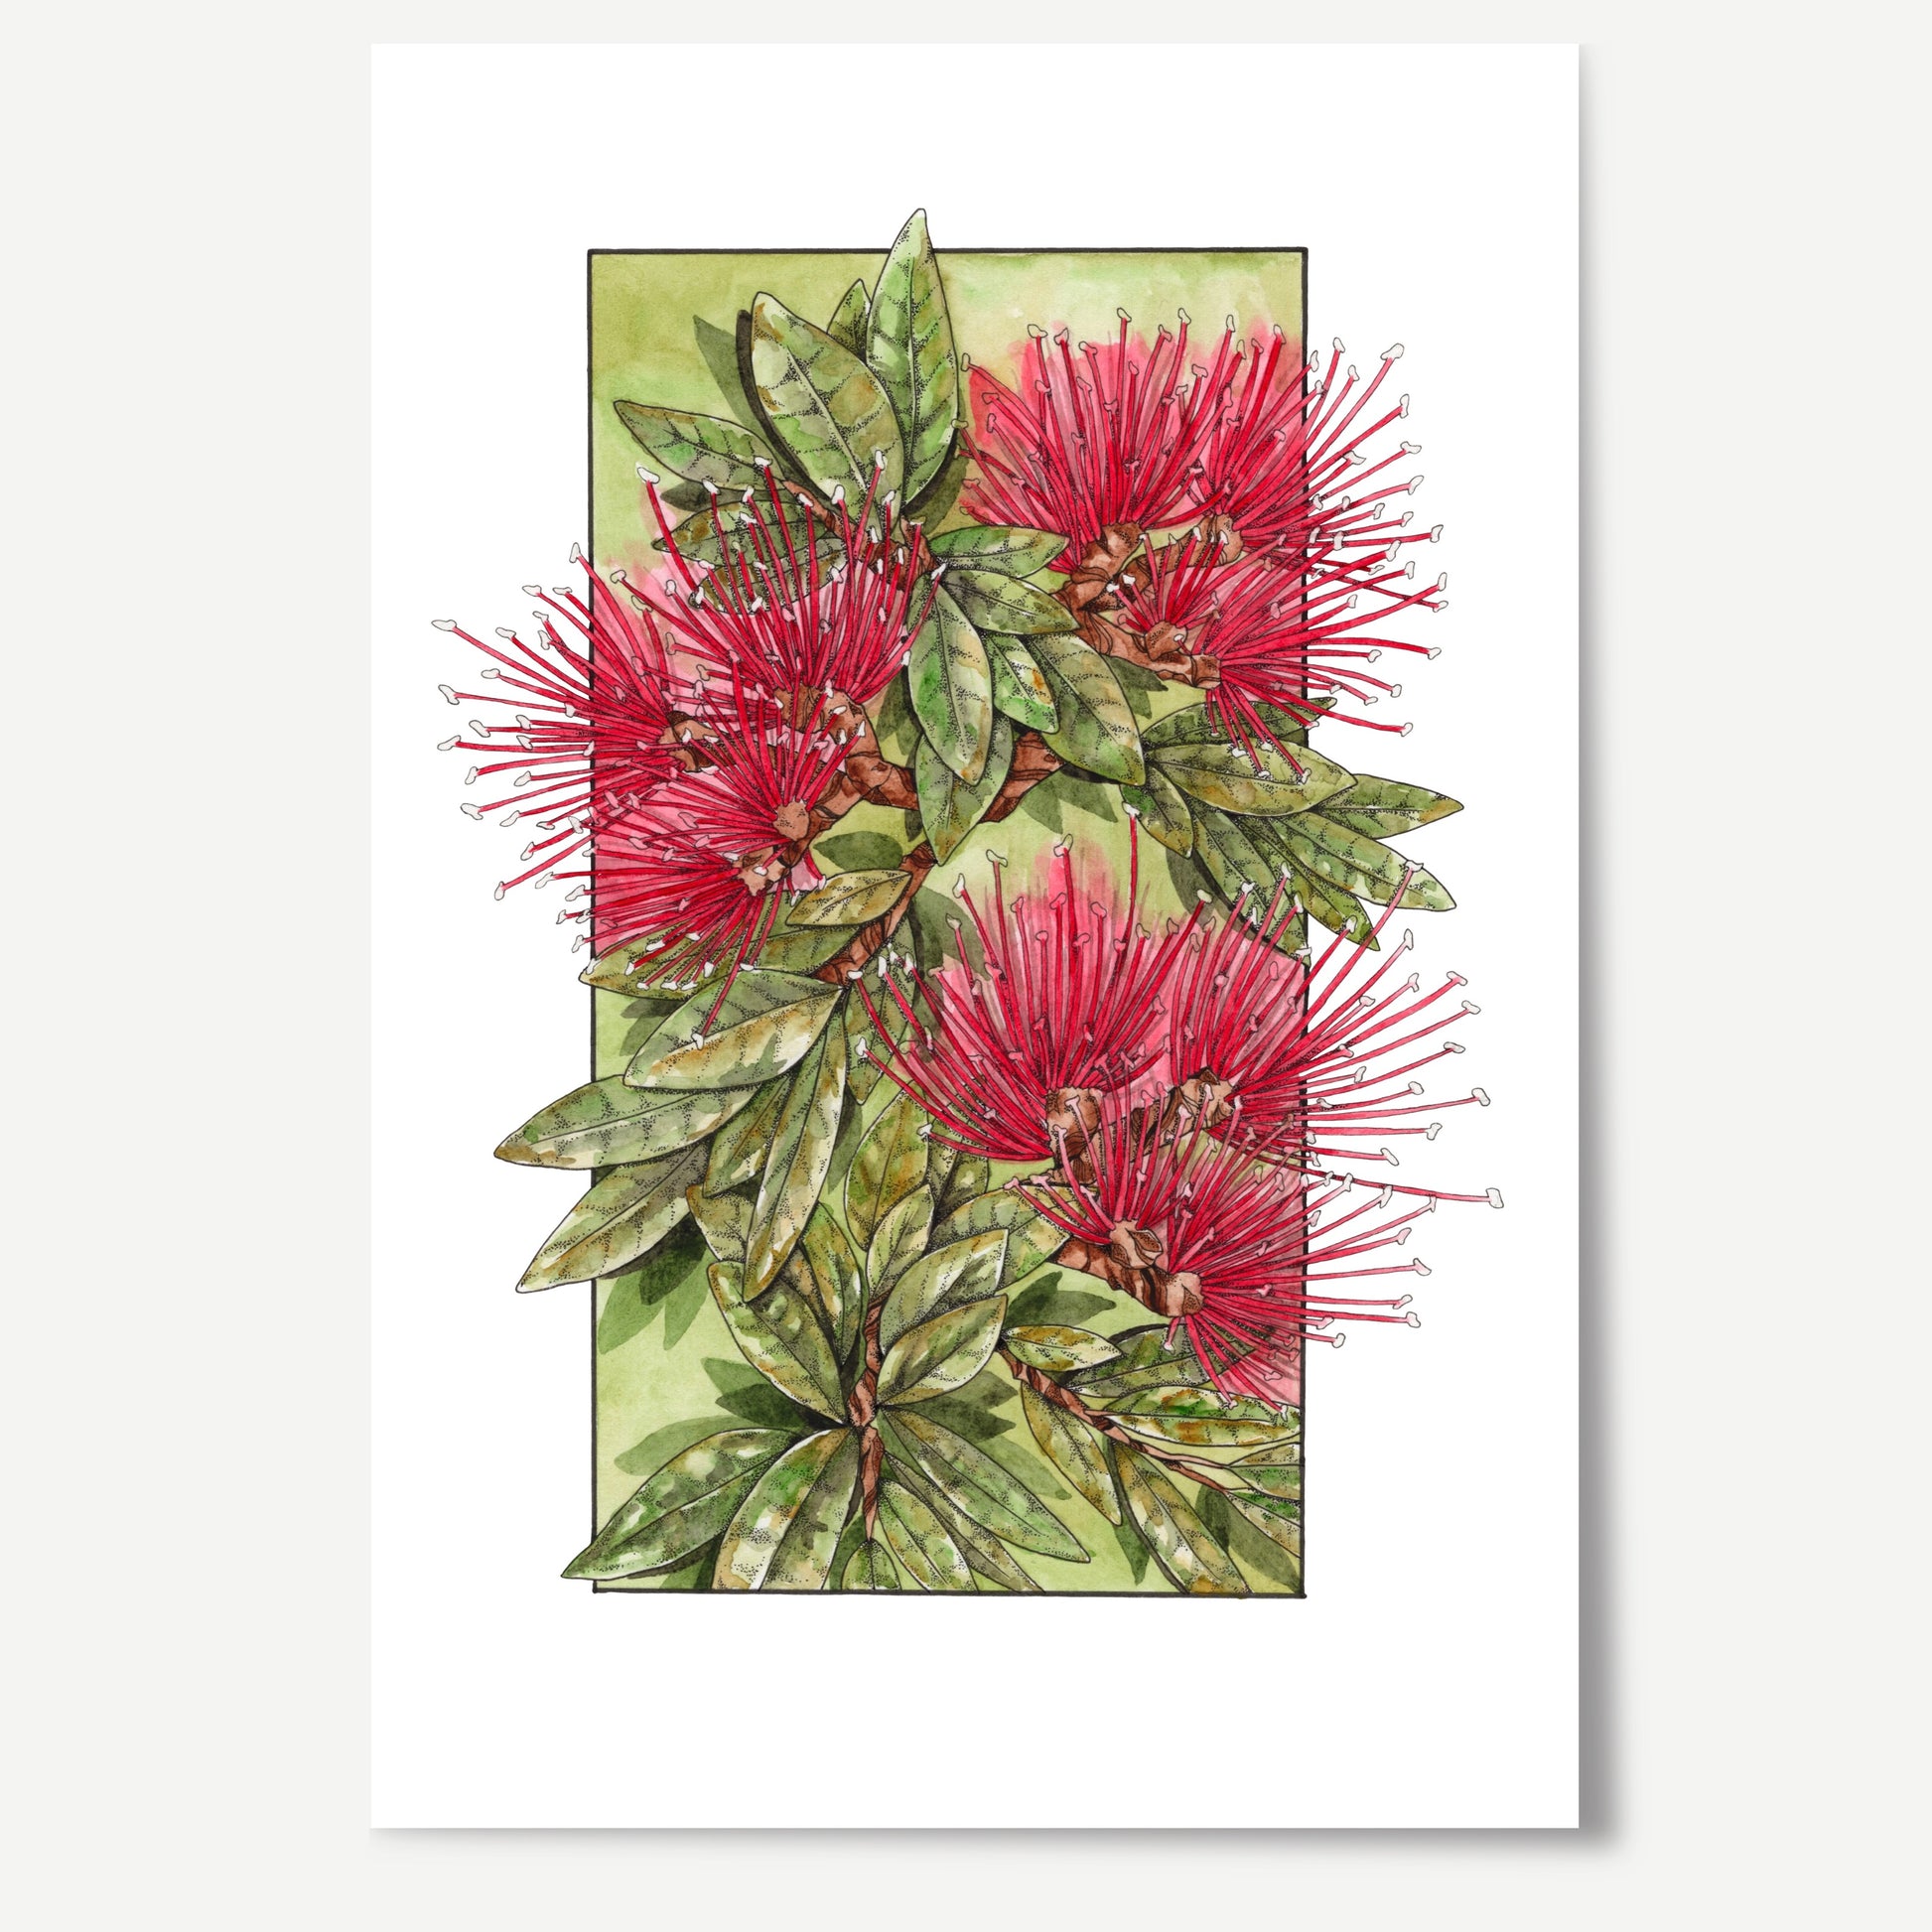 Watercolour art featuring the red pohutukawa flower and green foliage.